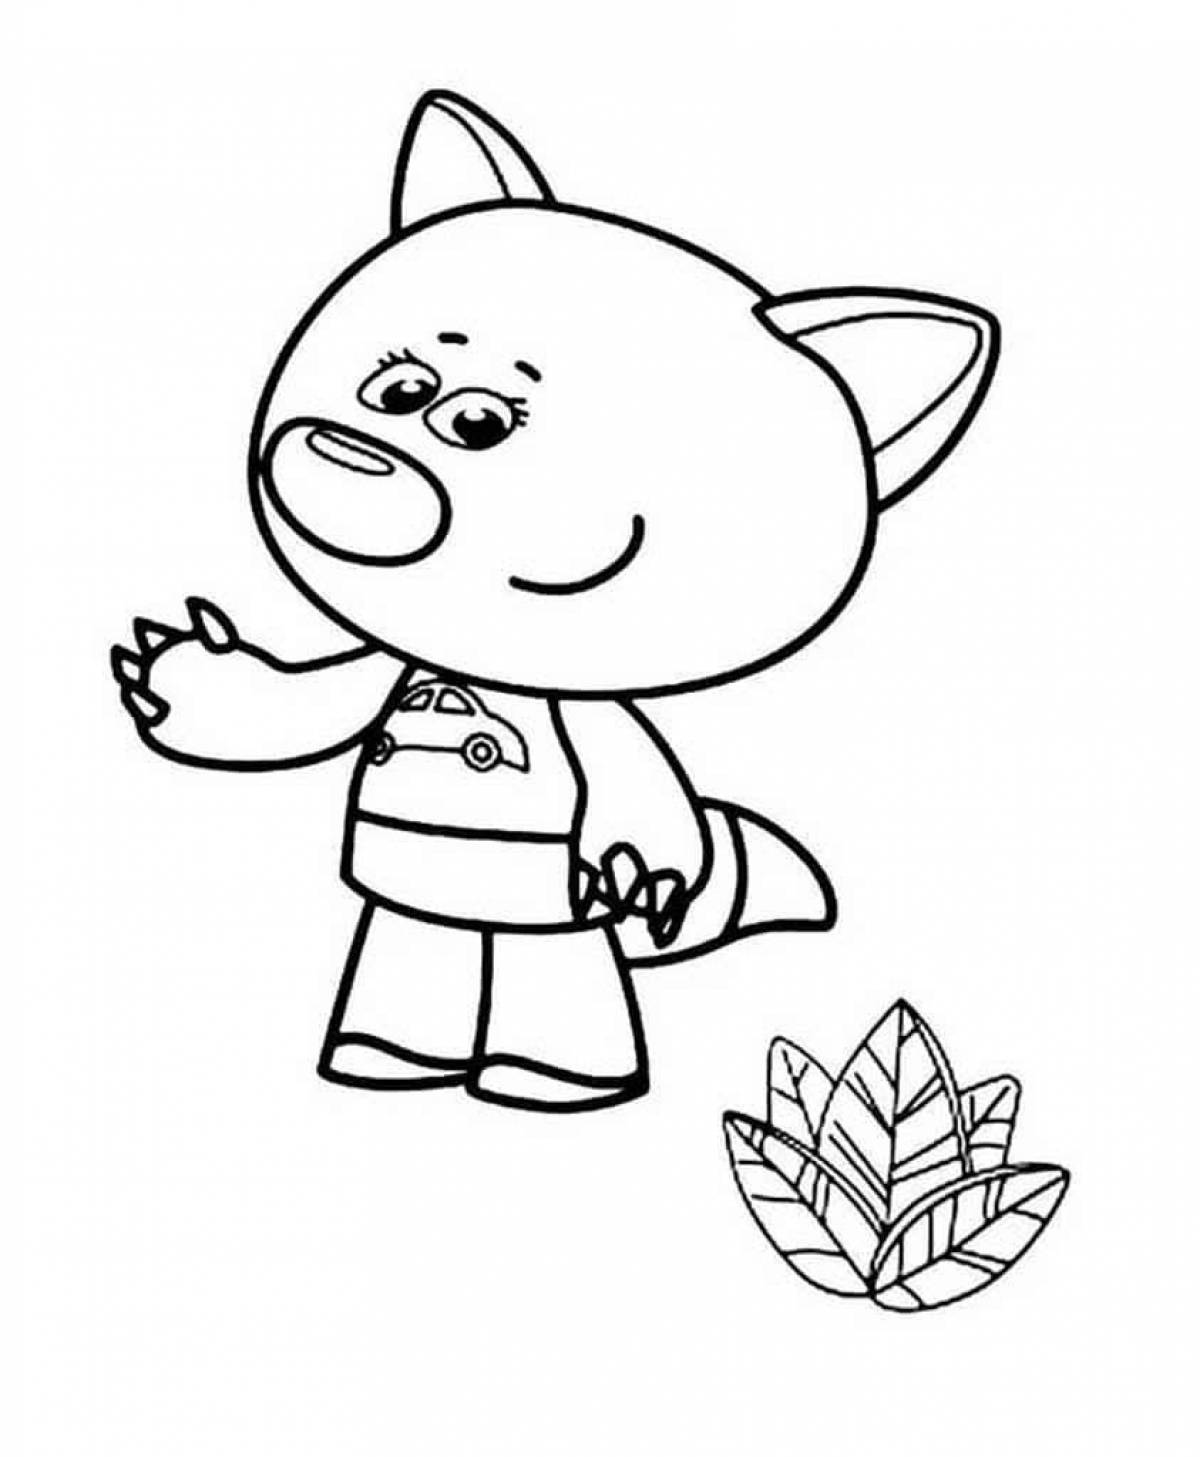 Cute bear coloring pages for kids